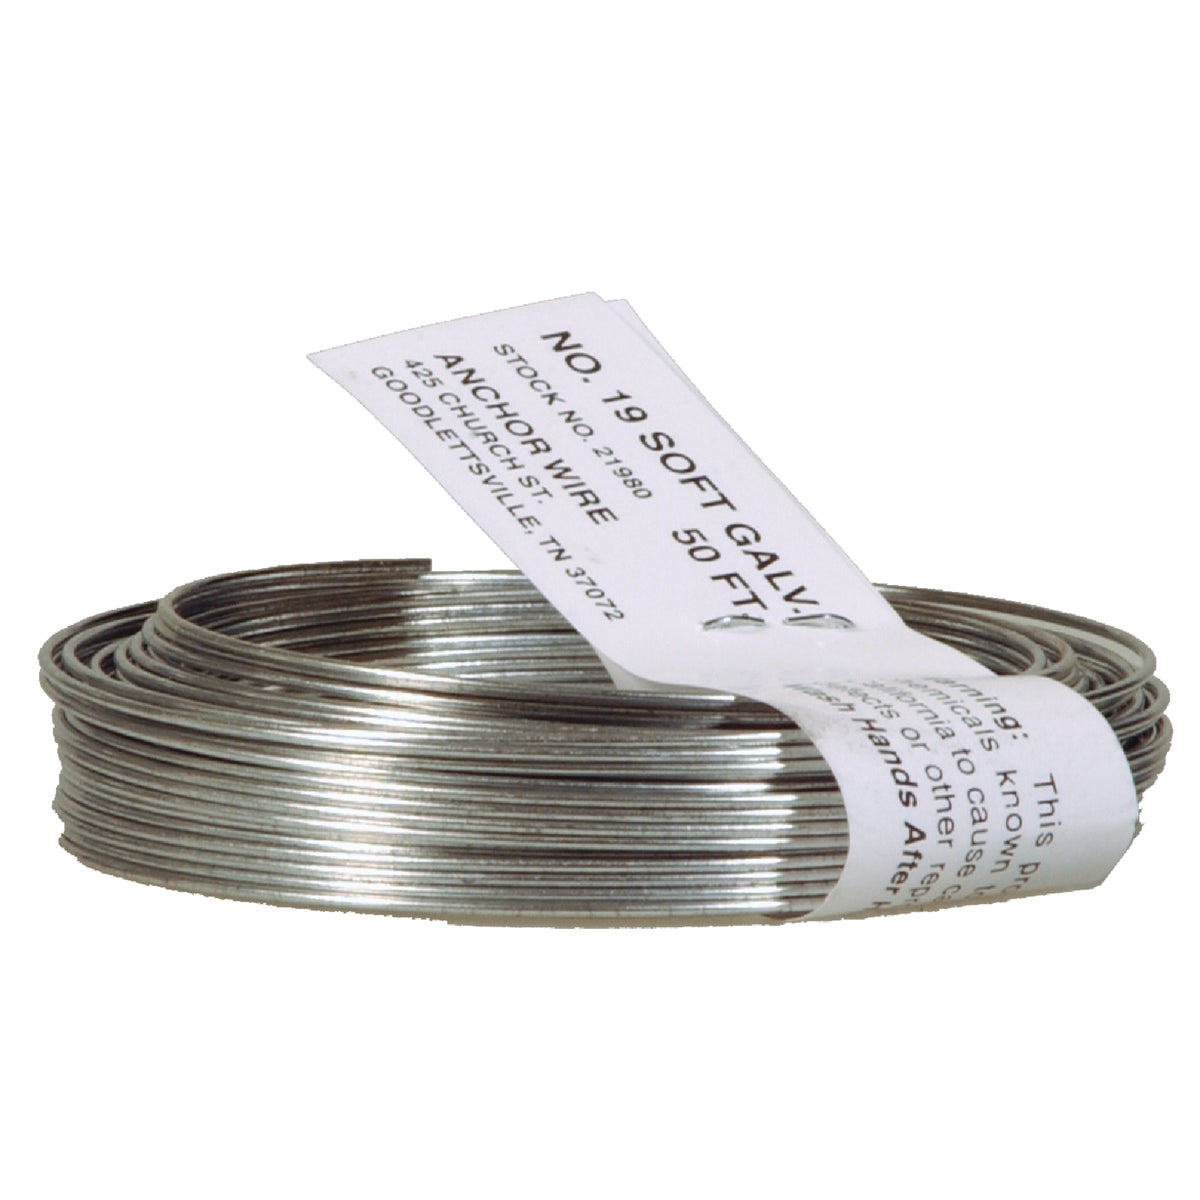 Hillman Anchor Wire 50 Ft. 18 Ga. Dark Annealed Steel Mechanics and Stovepipe General Purpose Wire, Coil